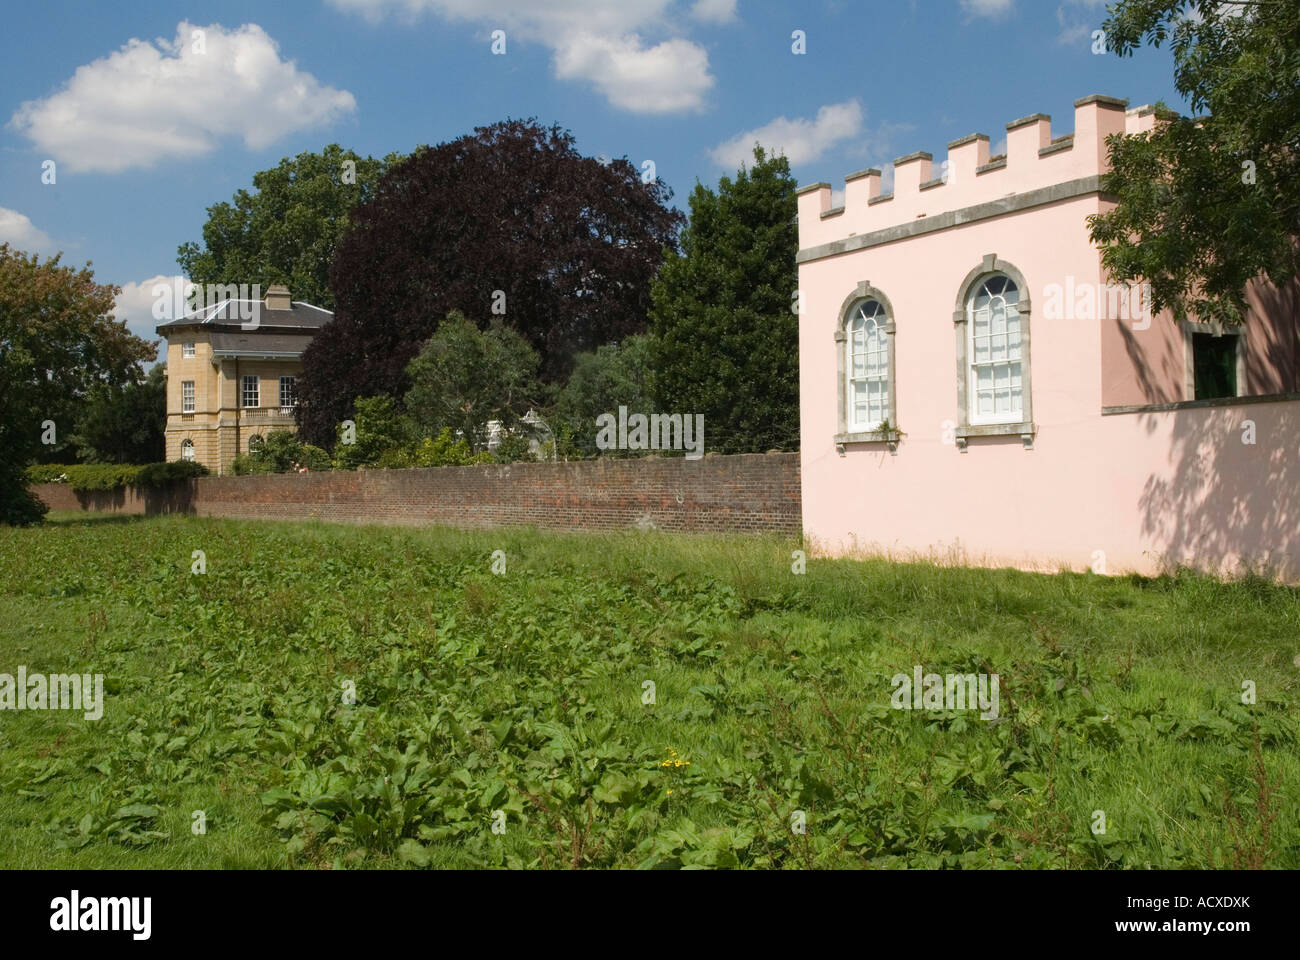 Asgill House, overlooking the River Thames, Old Palace Lane in Richmond Upon Thames Surrey UK Pink building is a  Summer House 2007 HOMER SYKES Stock Photo